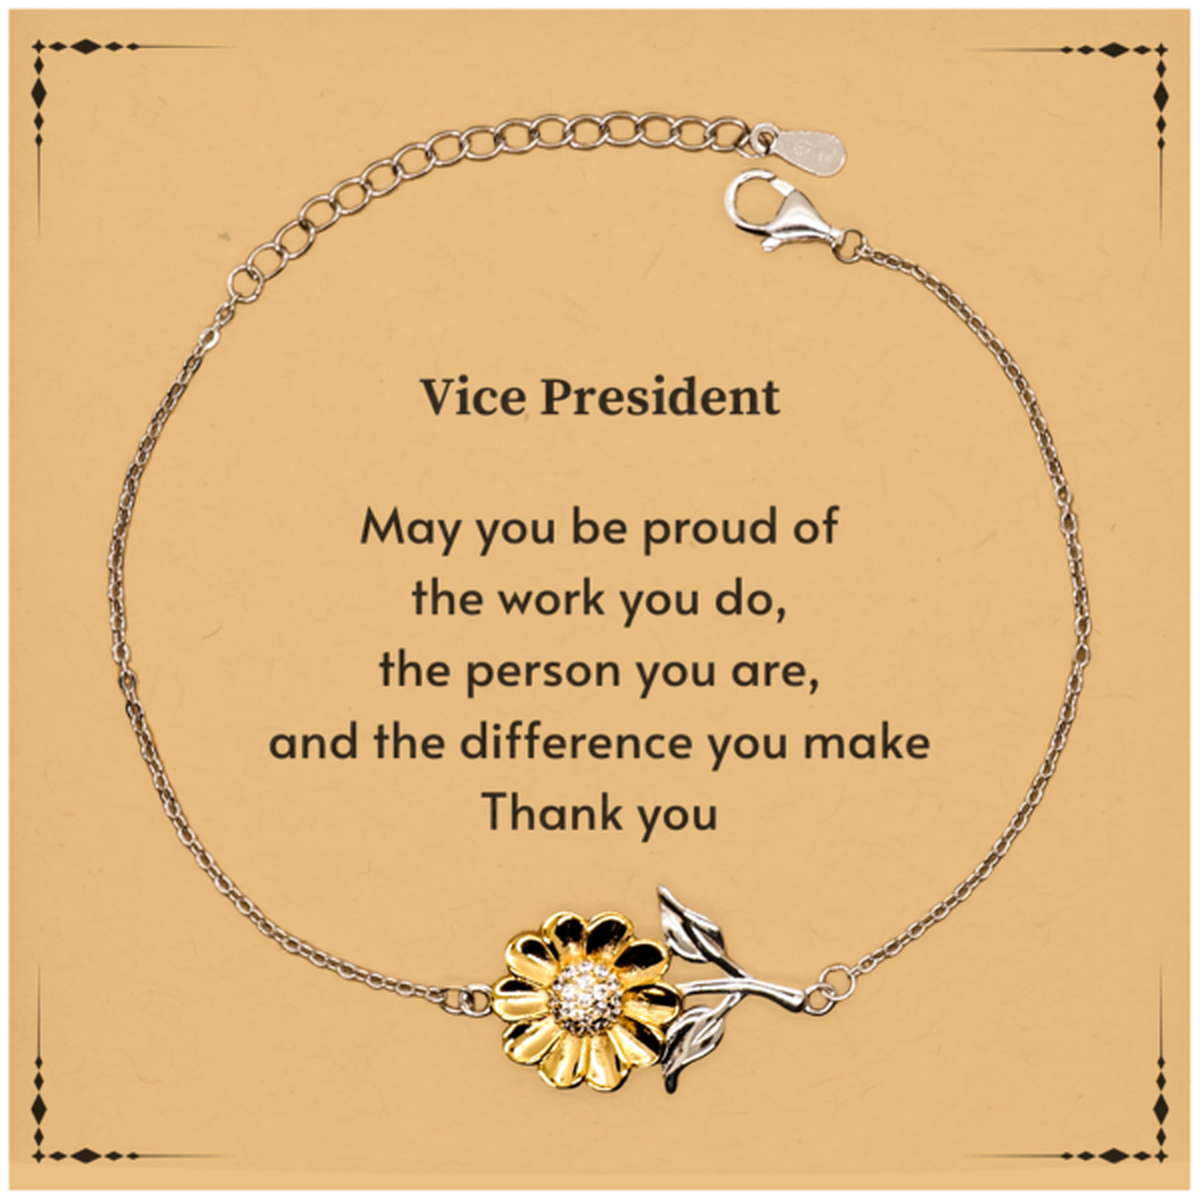 Heartwarming Sunflower Bracelet Retirement Coworkers Gifts for Vice President, Vice President May You be proud of the work you do, the person you are Gifts for Boss Men Women Friends